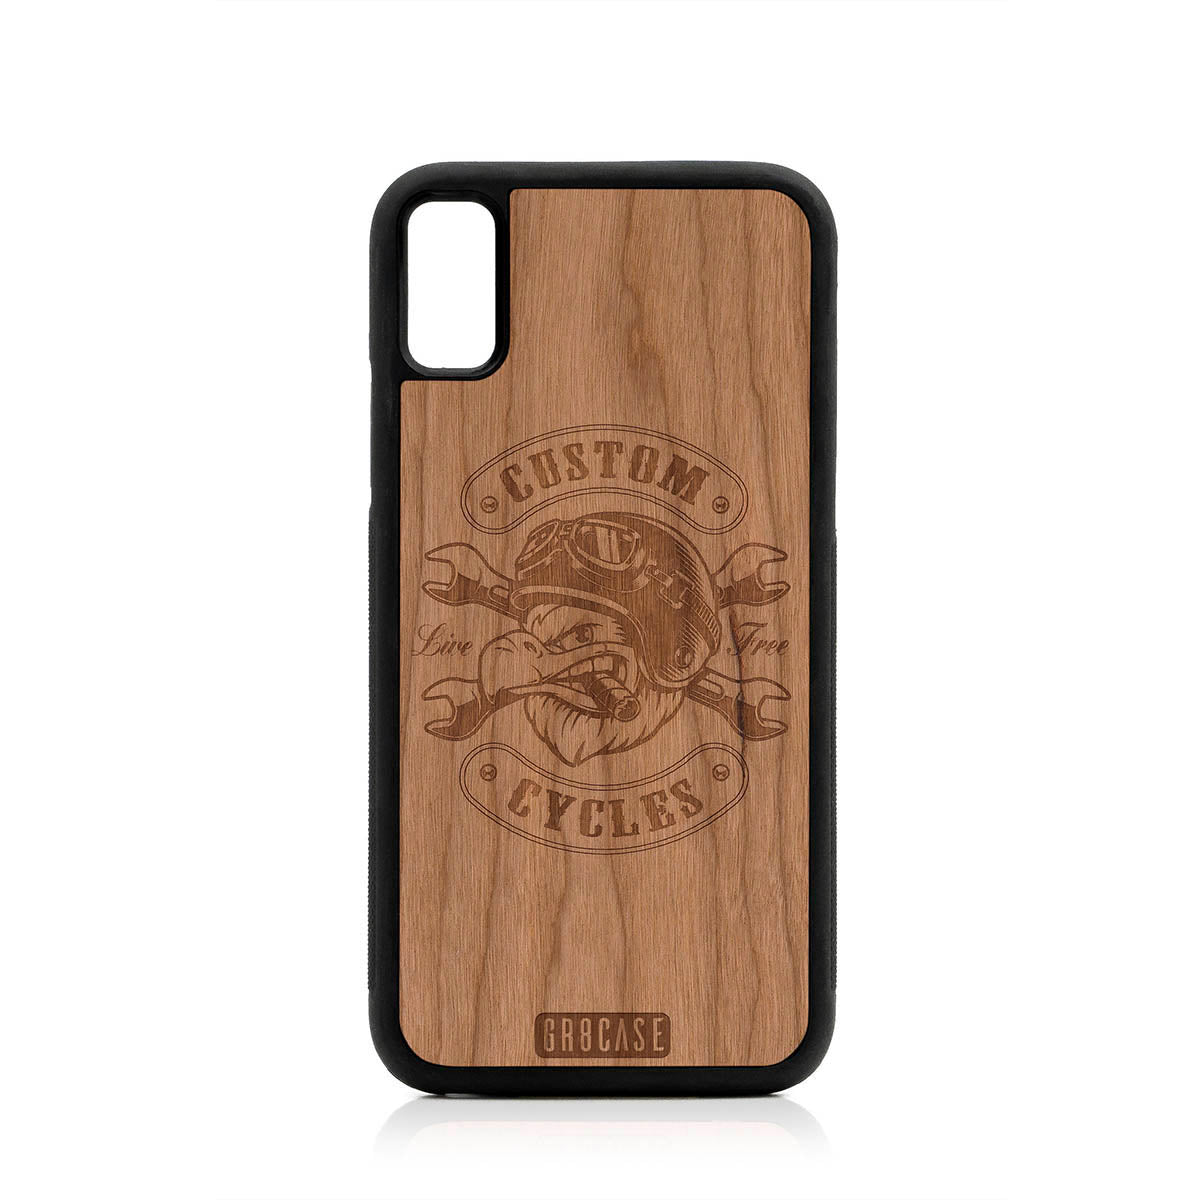 Custom Cycles Live Free (Biker Eagle) Design Wood Case For iPhone XS Max by GR8CASE